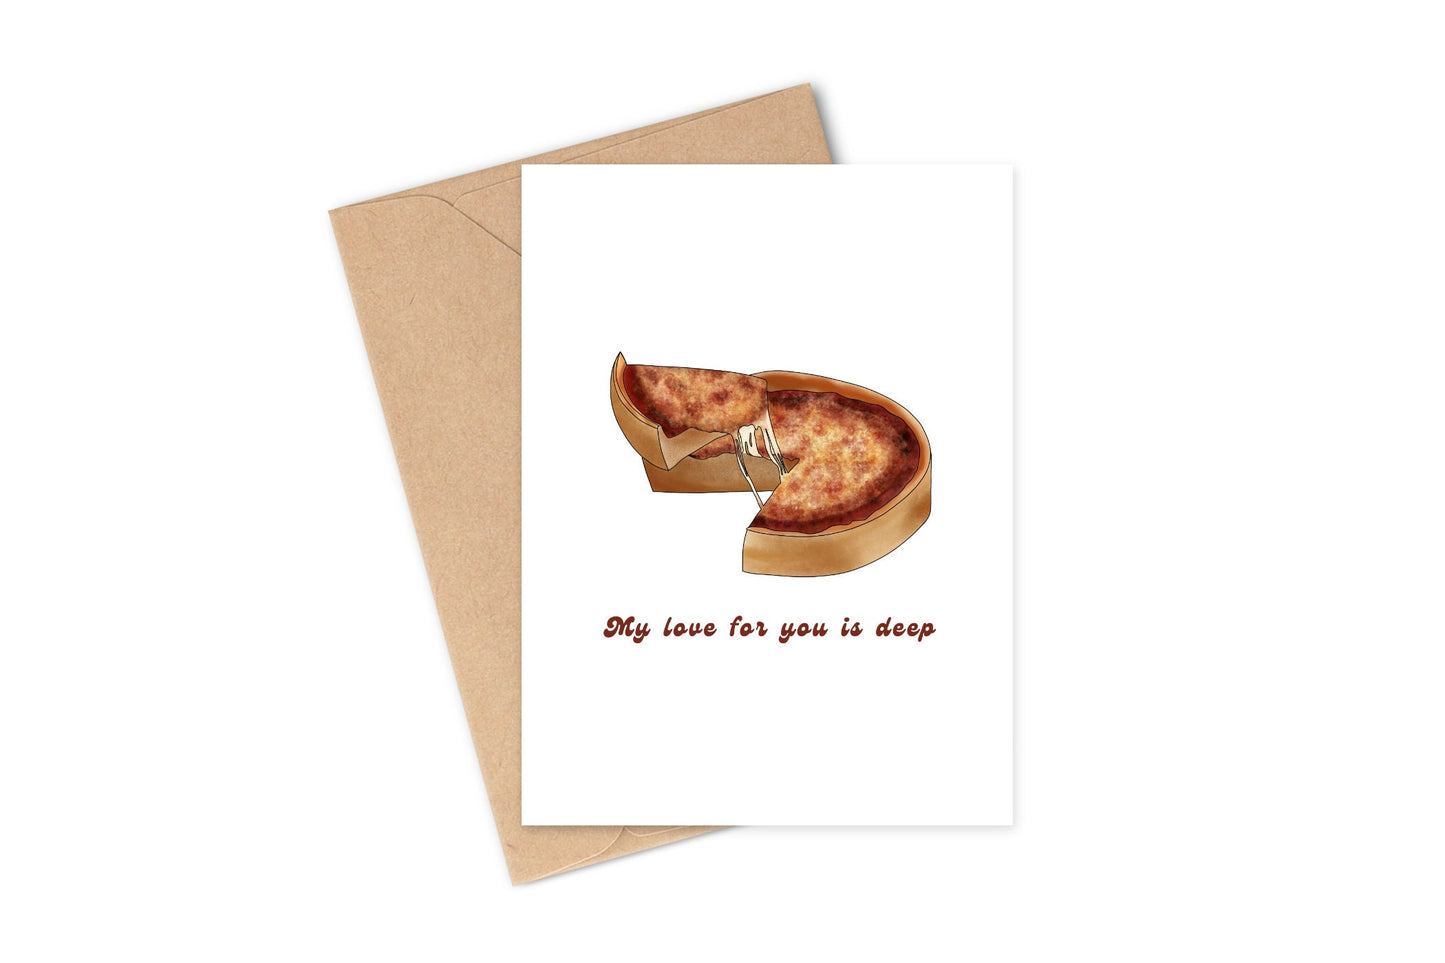 This is a completely hand-illustrated image of a pizza slice being pulled up from a pizza pie. It says "my love for you is deep"